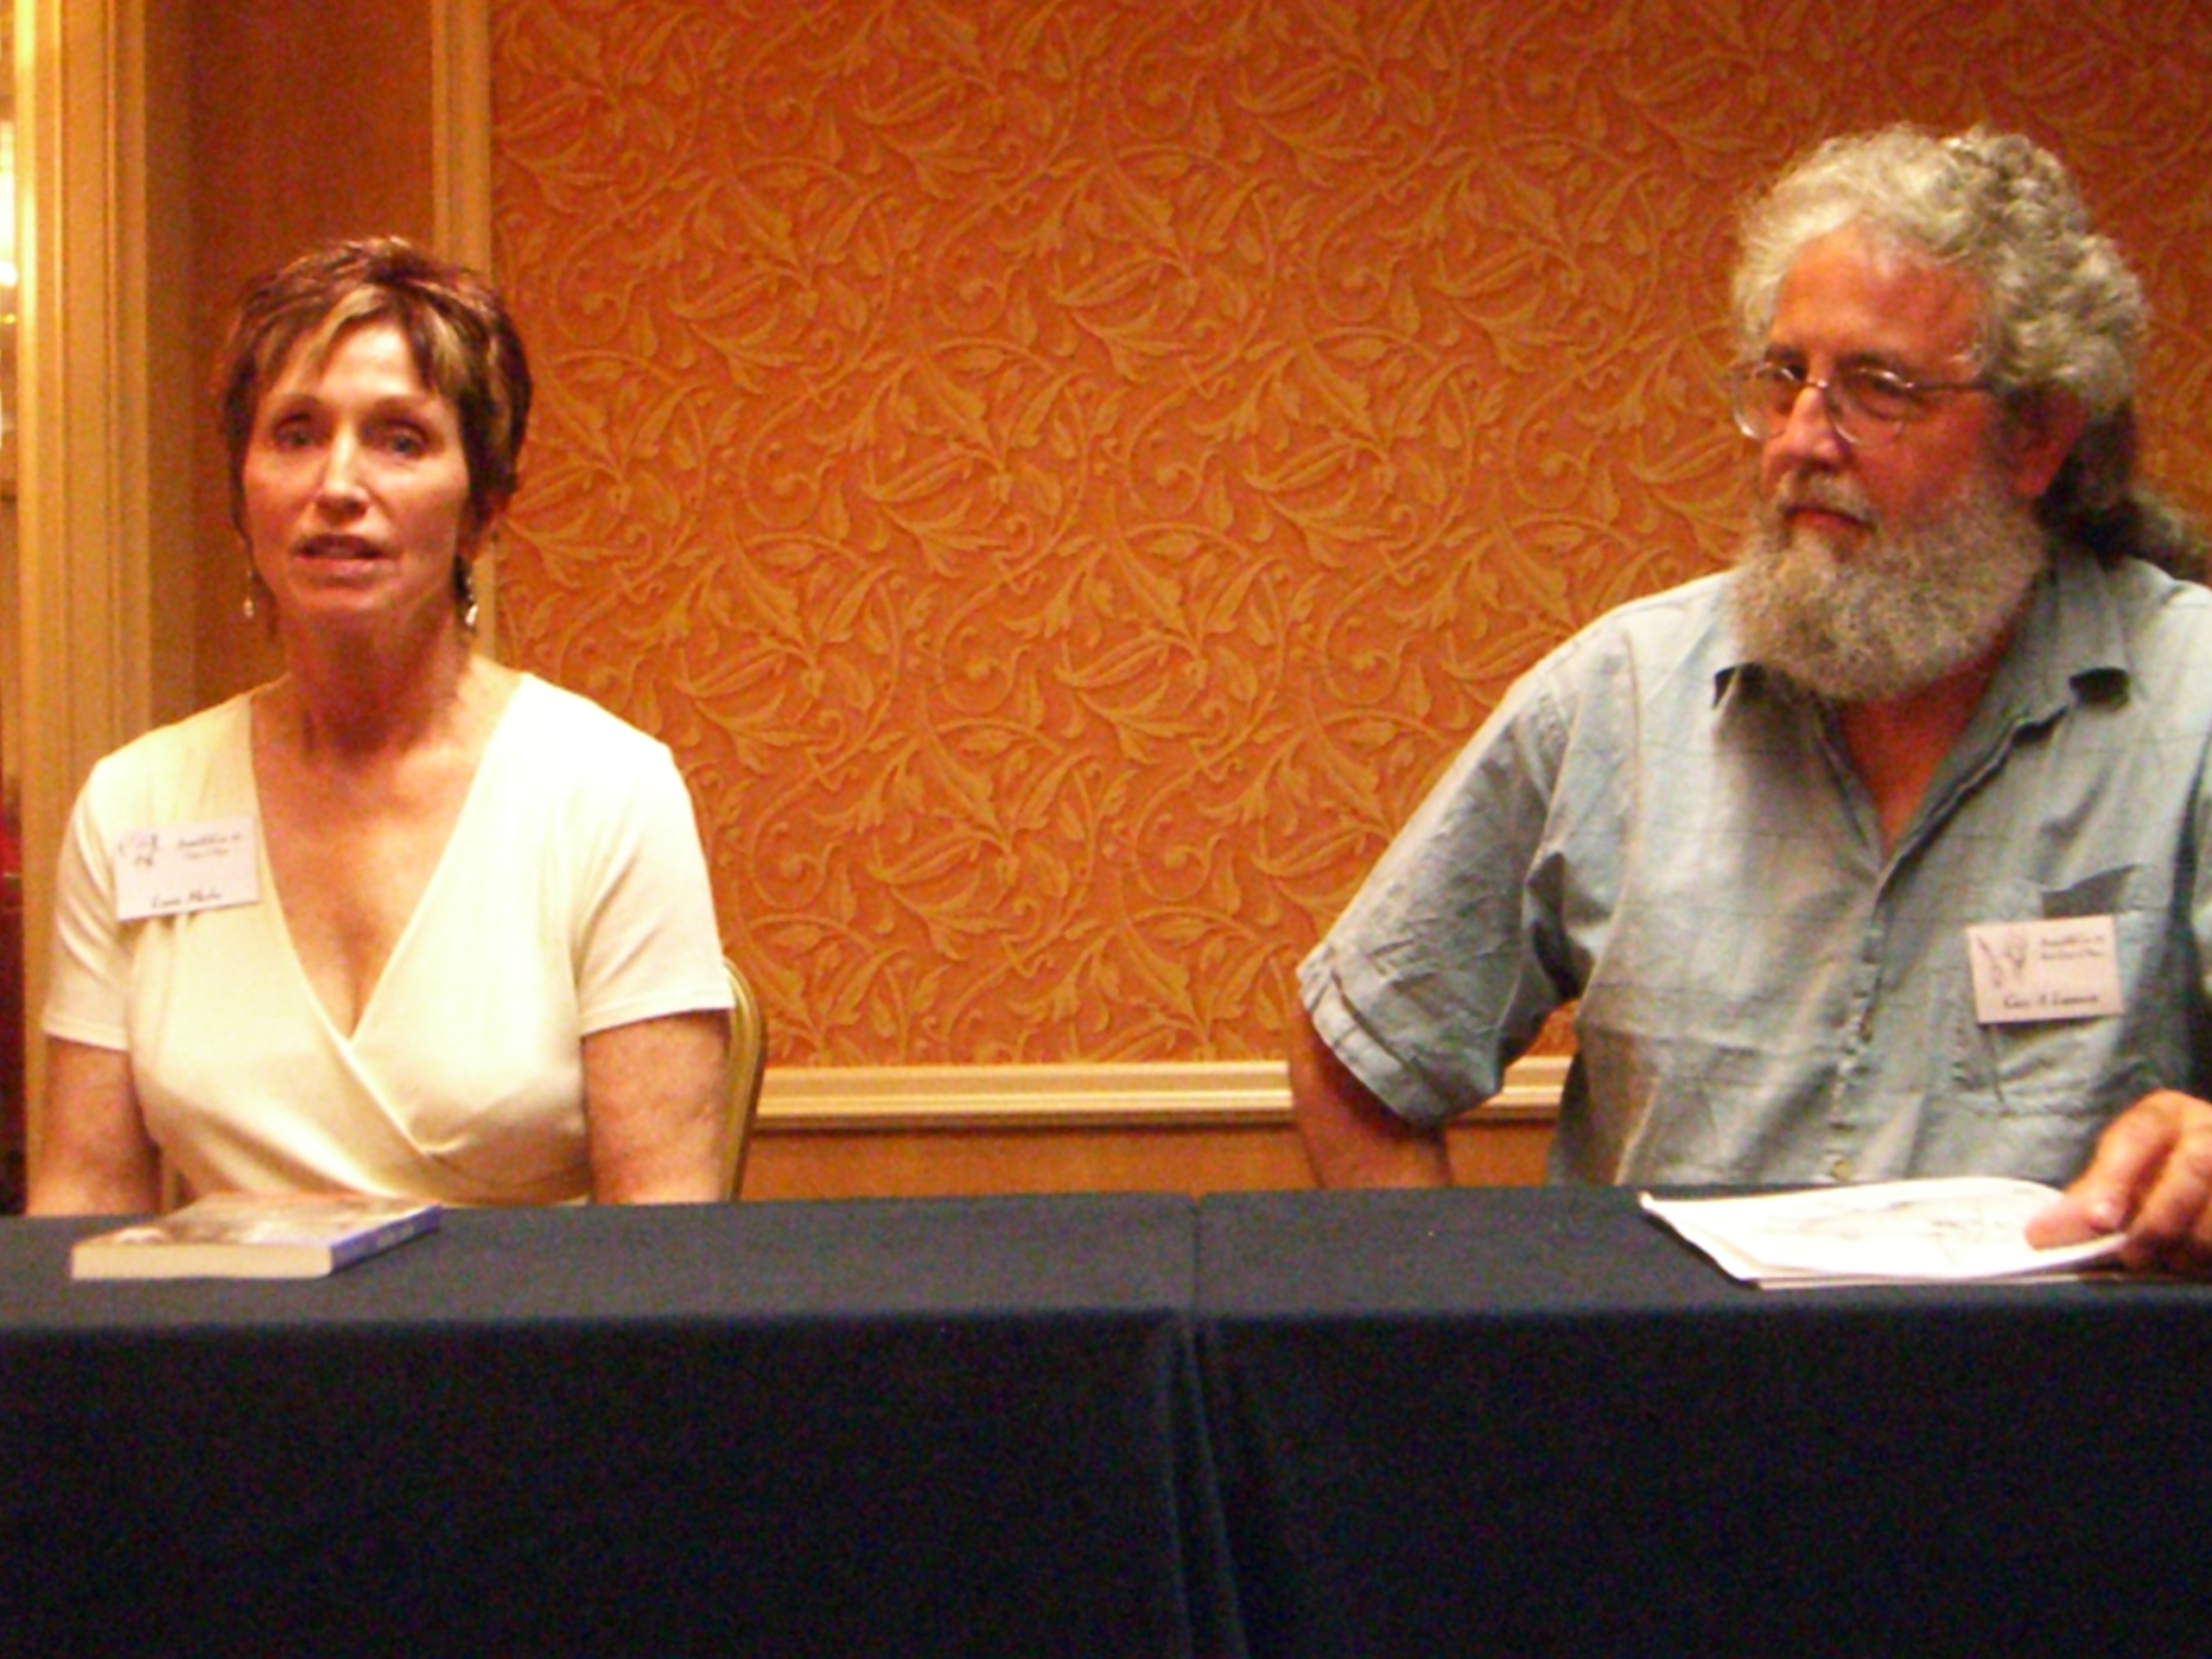 Guest of Honor Louise Marley and the artist guest Gary Lippincott at the ArmadilloCon 2007 opening ceremony